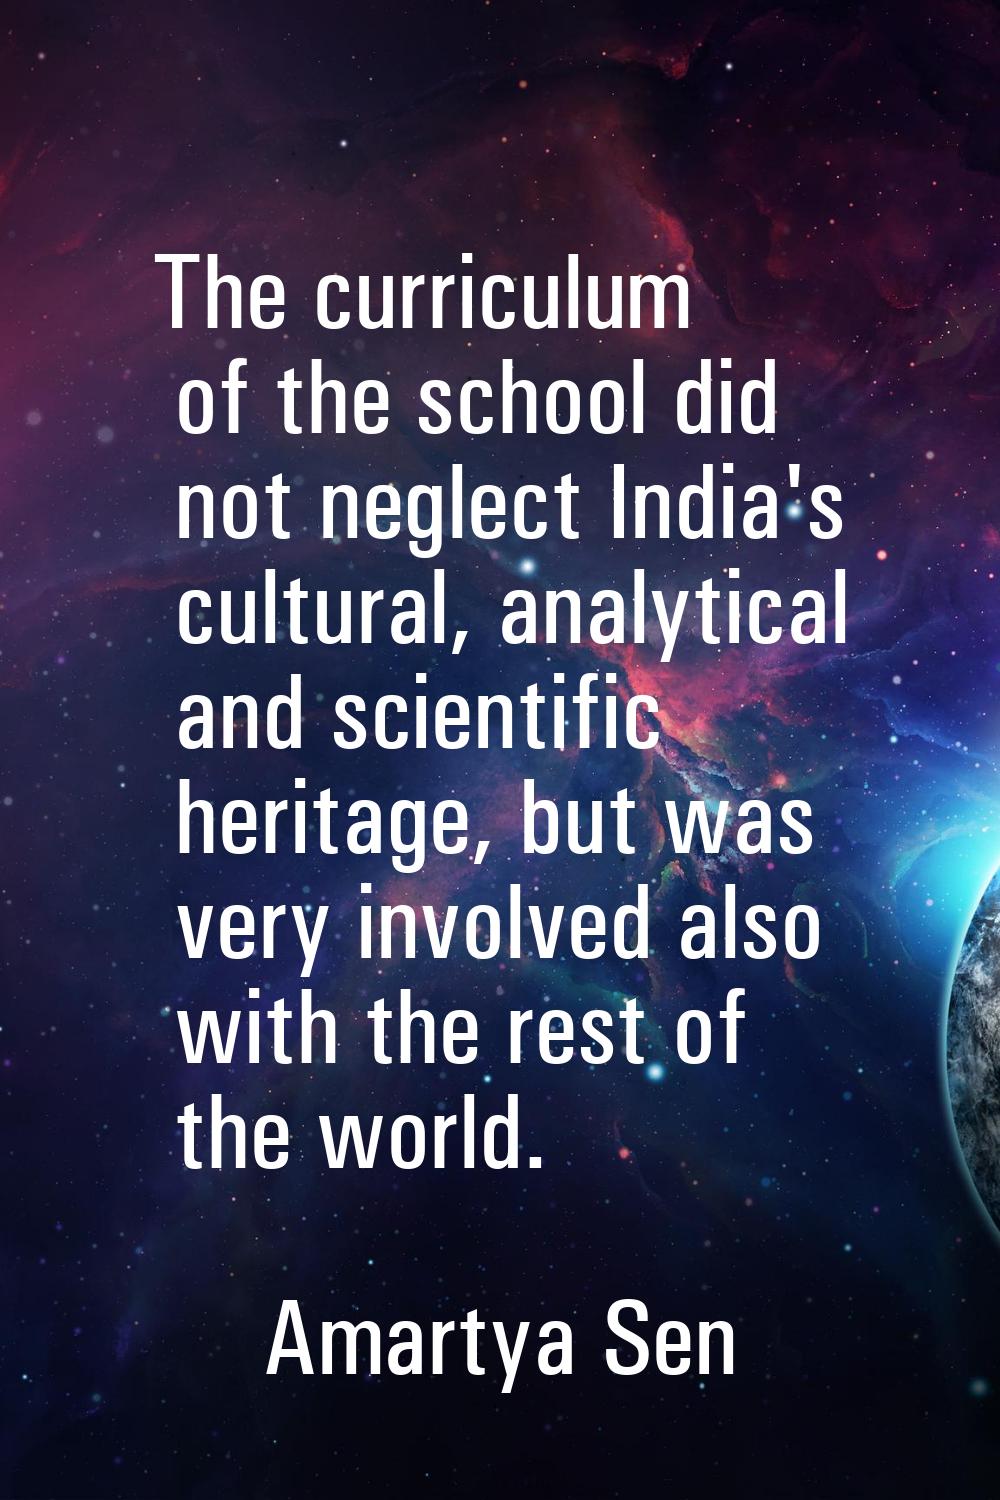 The curriculum of the school did not neglect India's cultural, analytical and scientific heritage, 